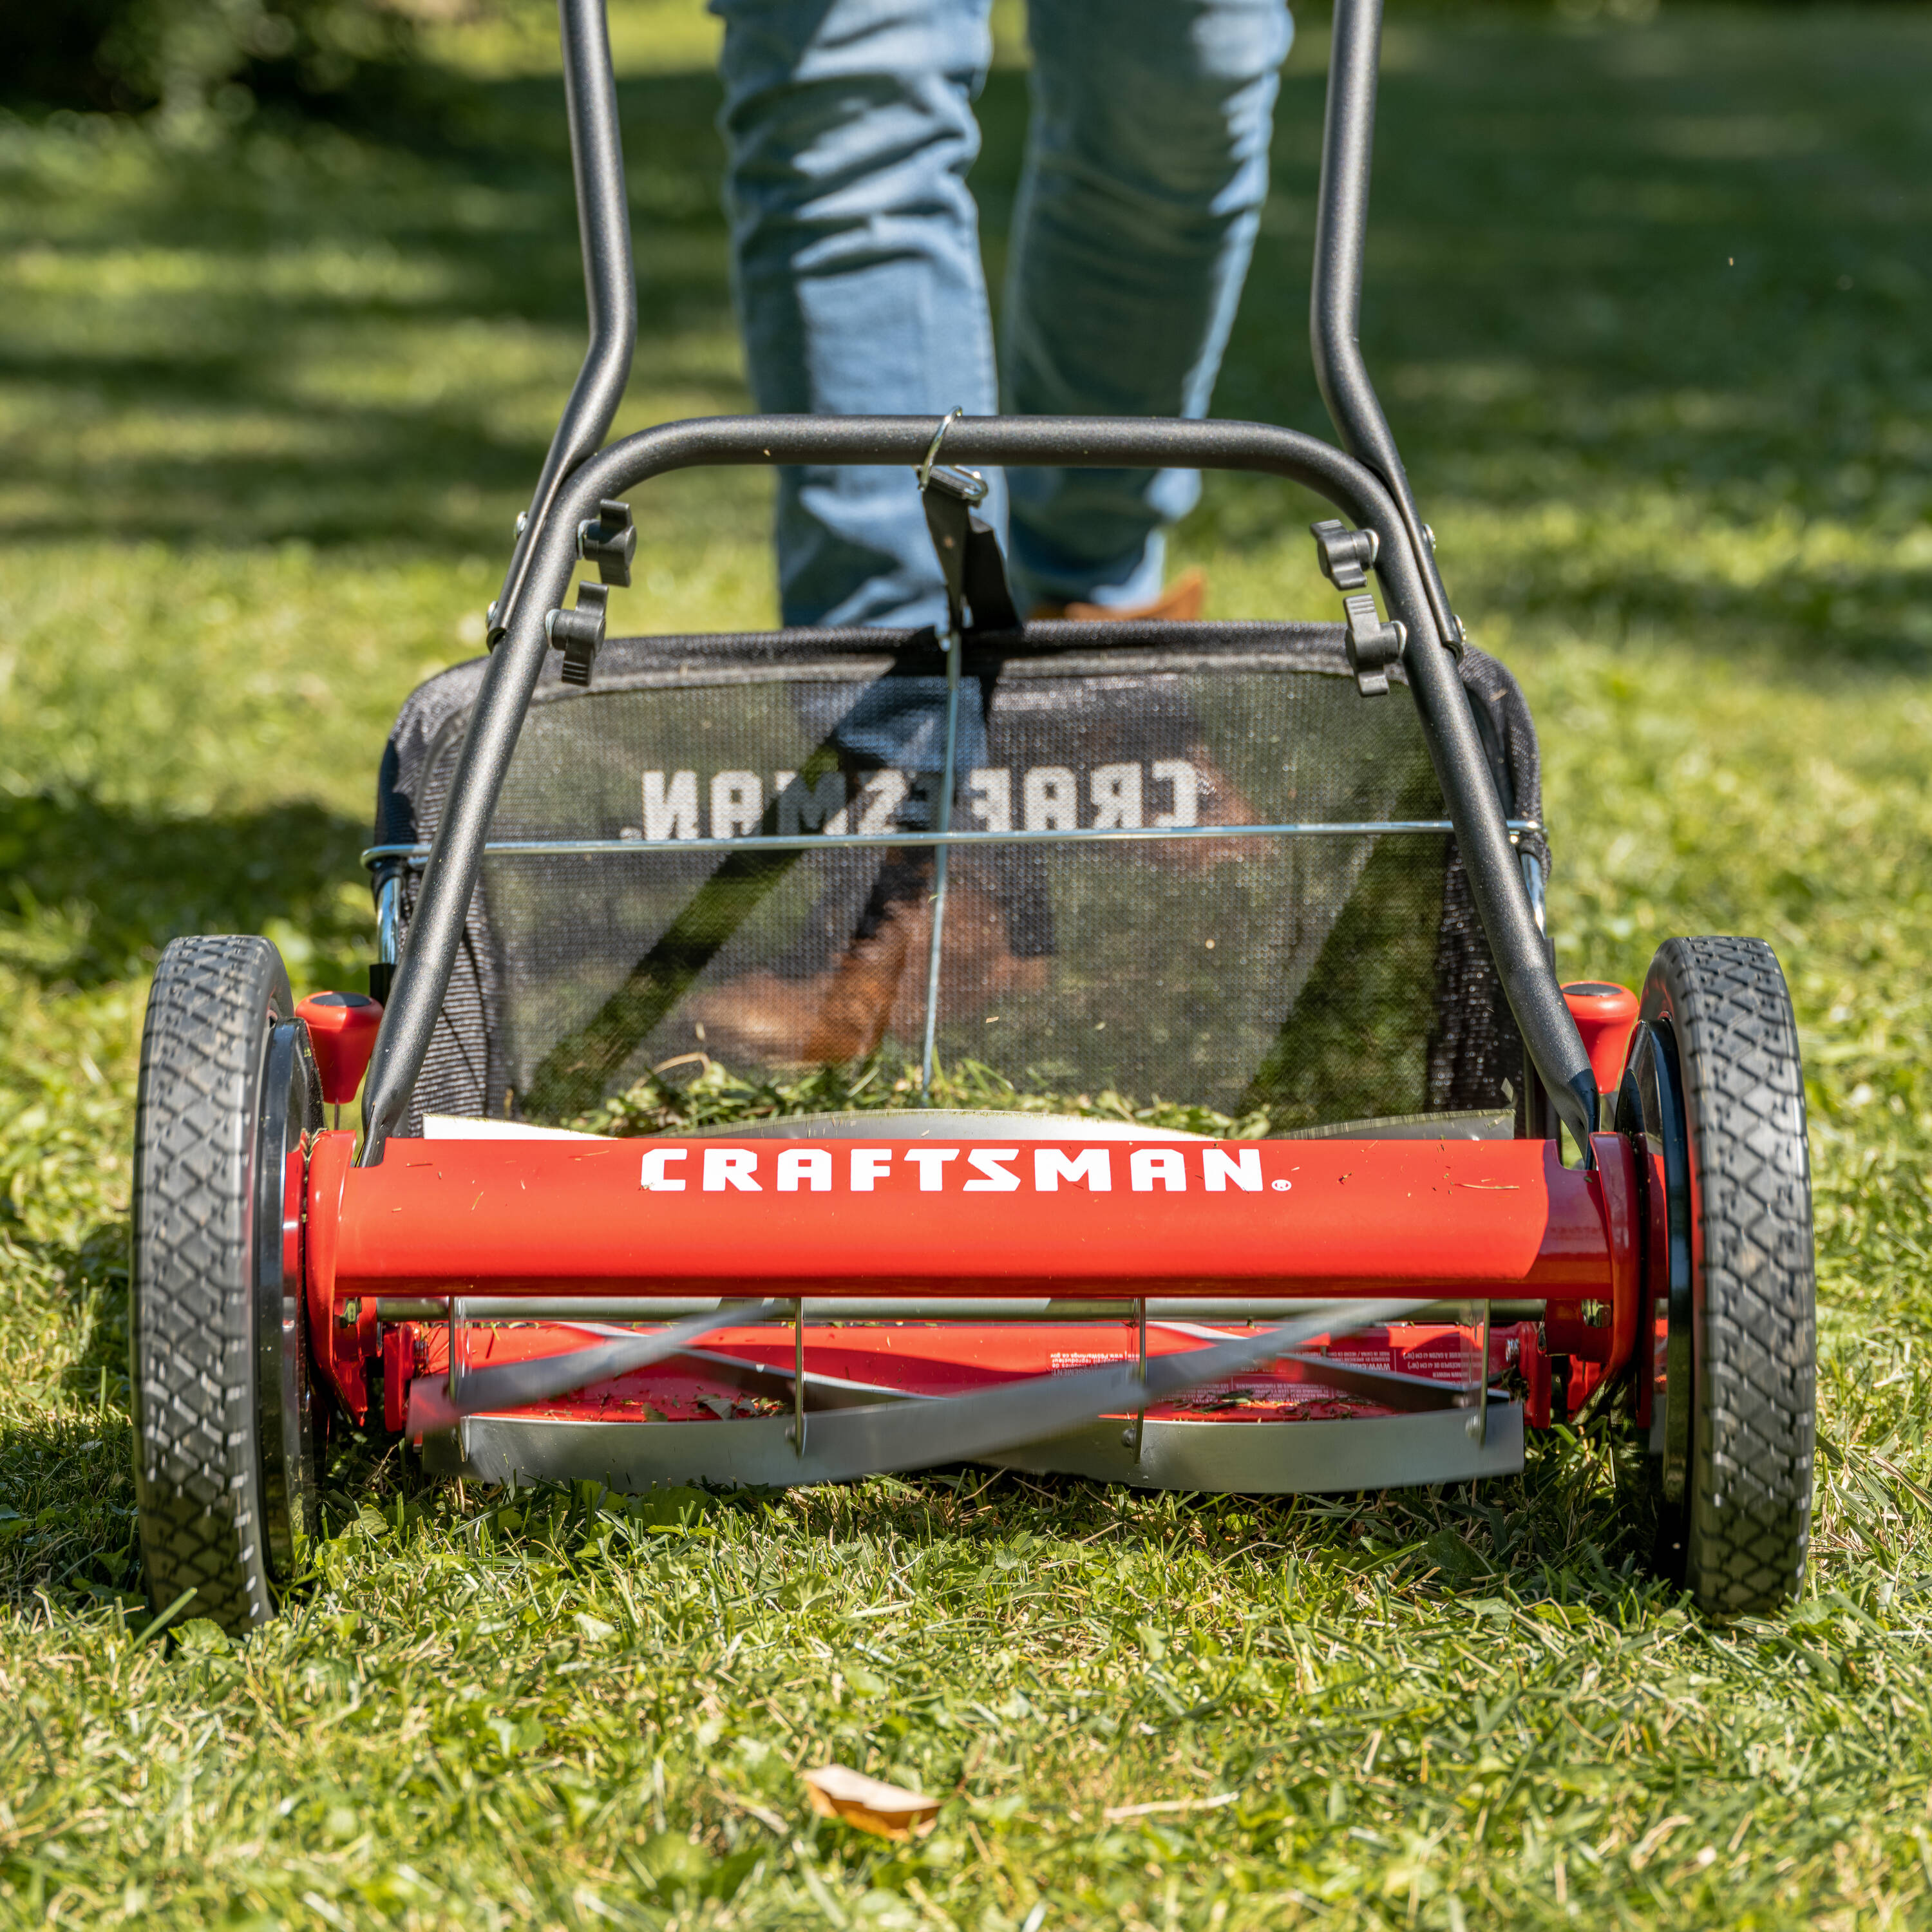 Craftsman 1816-16CR 16-inch 5-Blade Push Reel Lawn Mower with Grass Catcher, Red